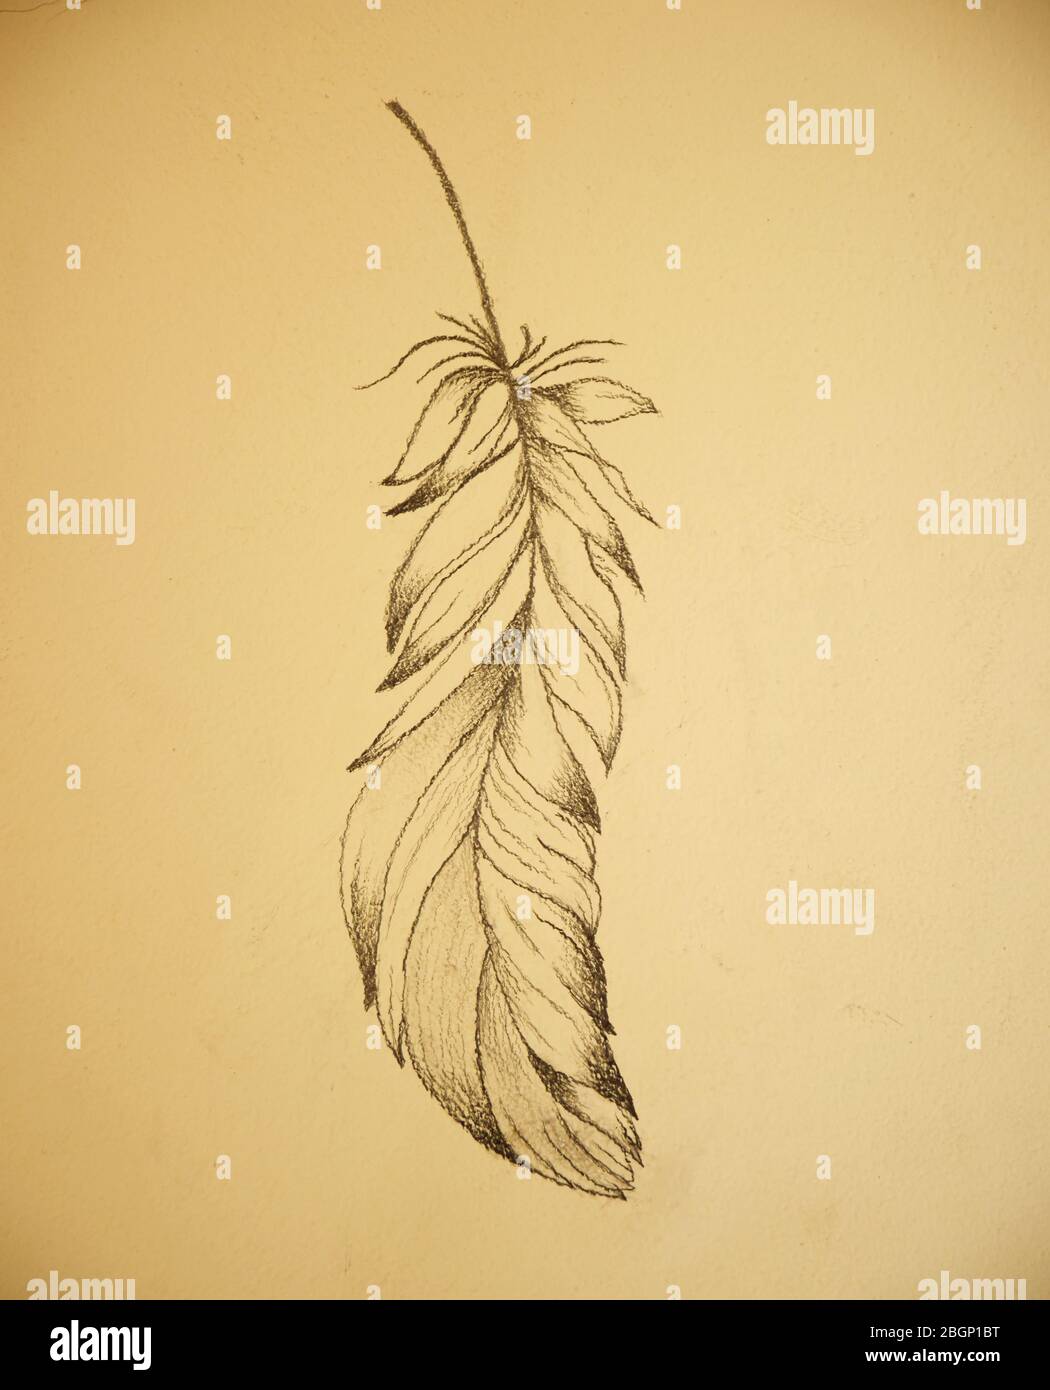 Pencil sketch of feather on wall Stock Photo